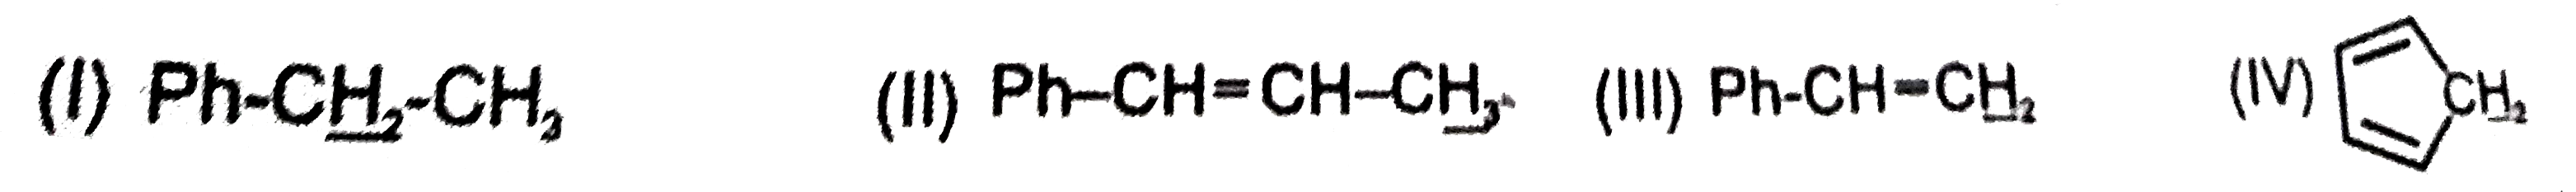 The order of acidity of the H-atoms underlined in the following compounds is in the order: